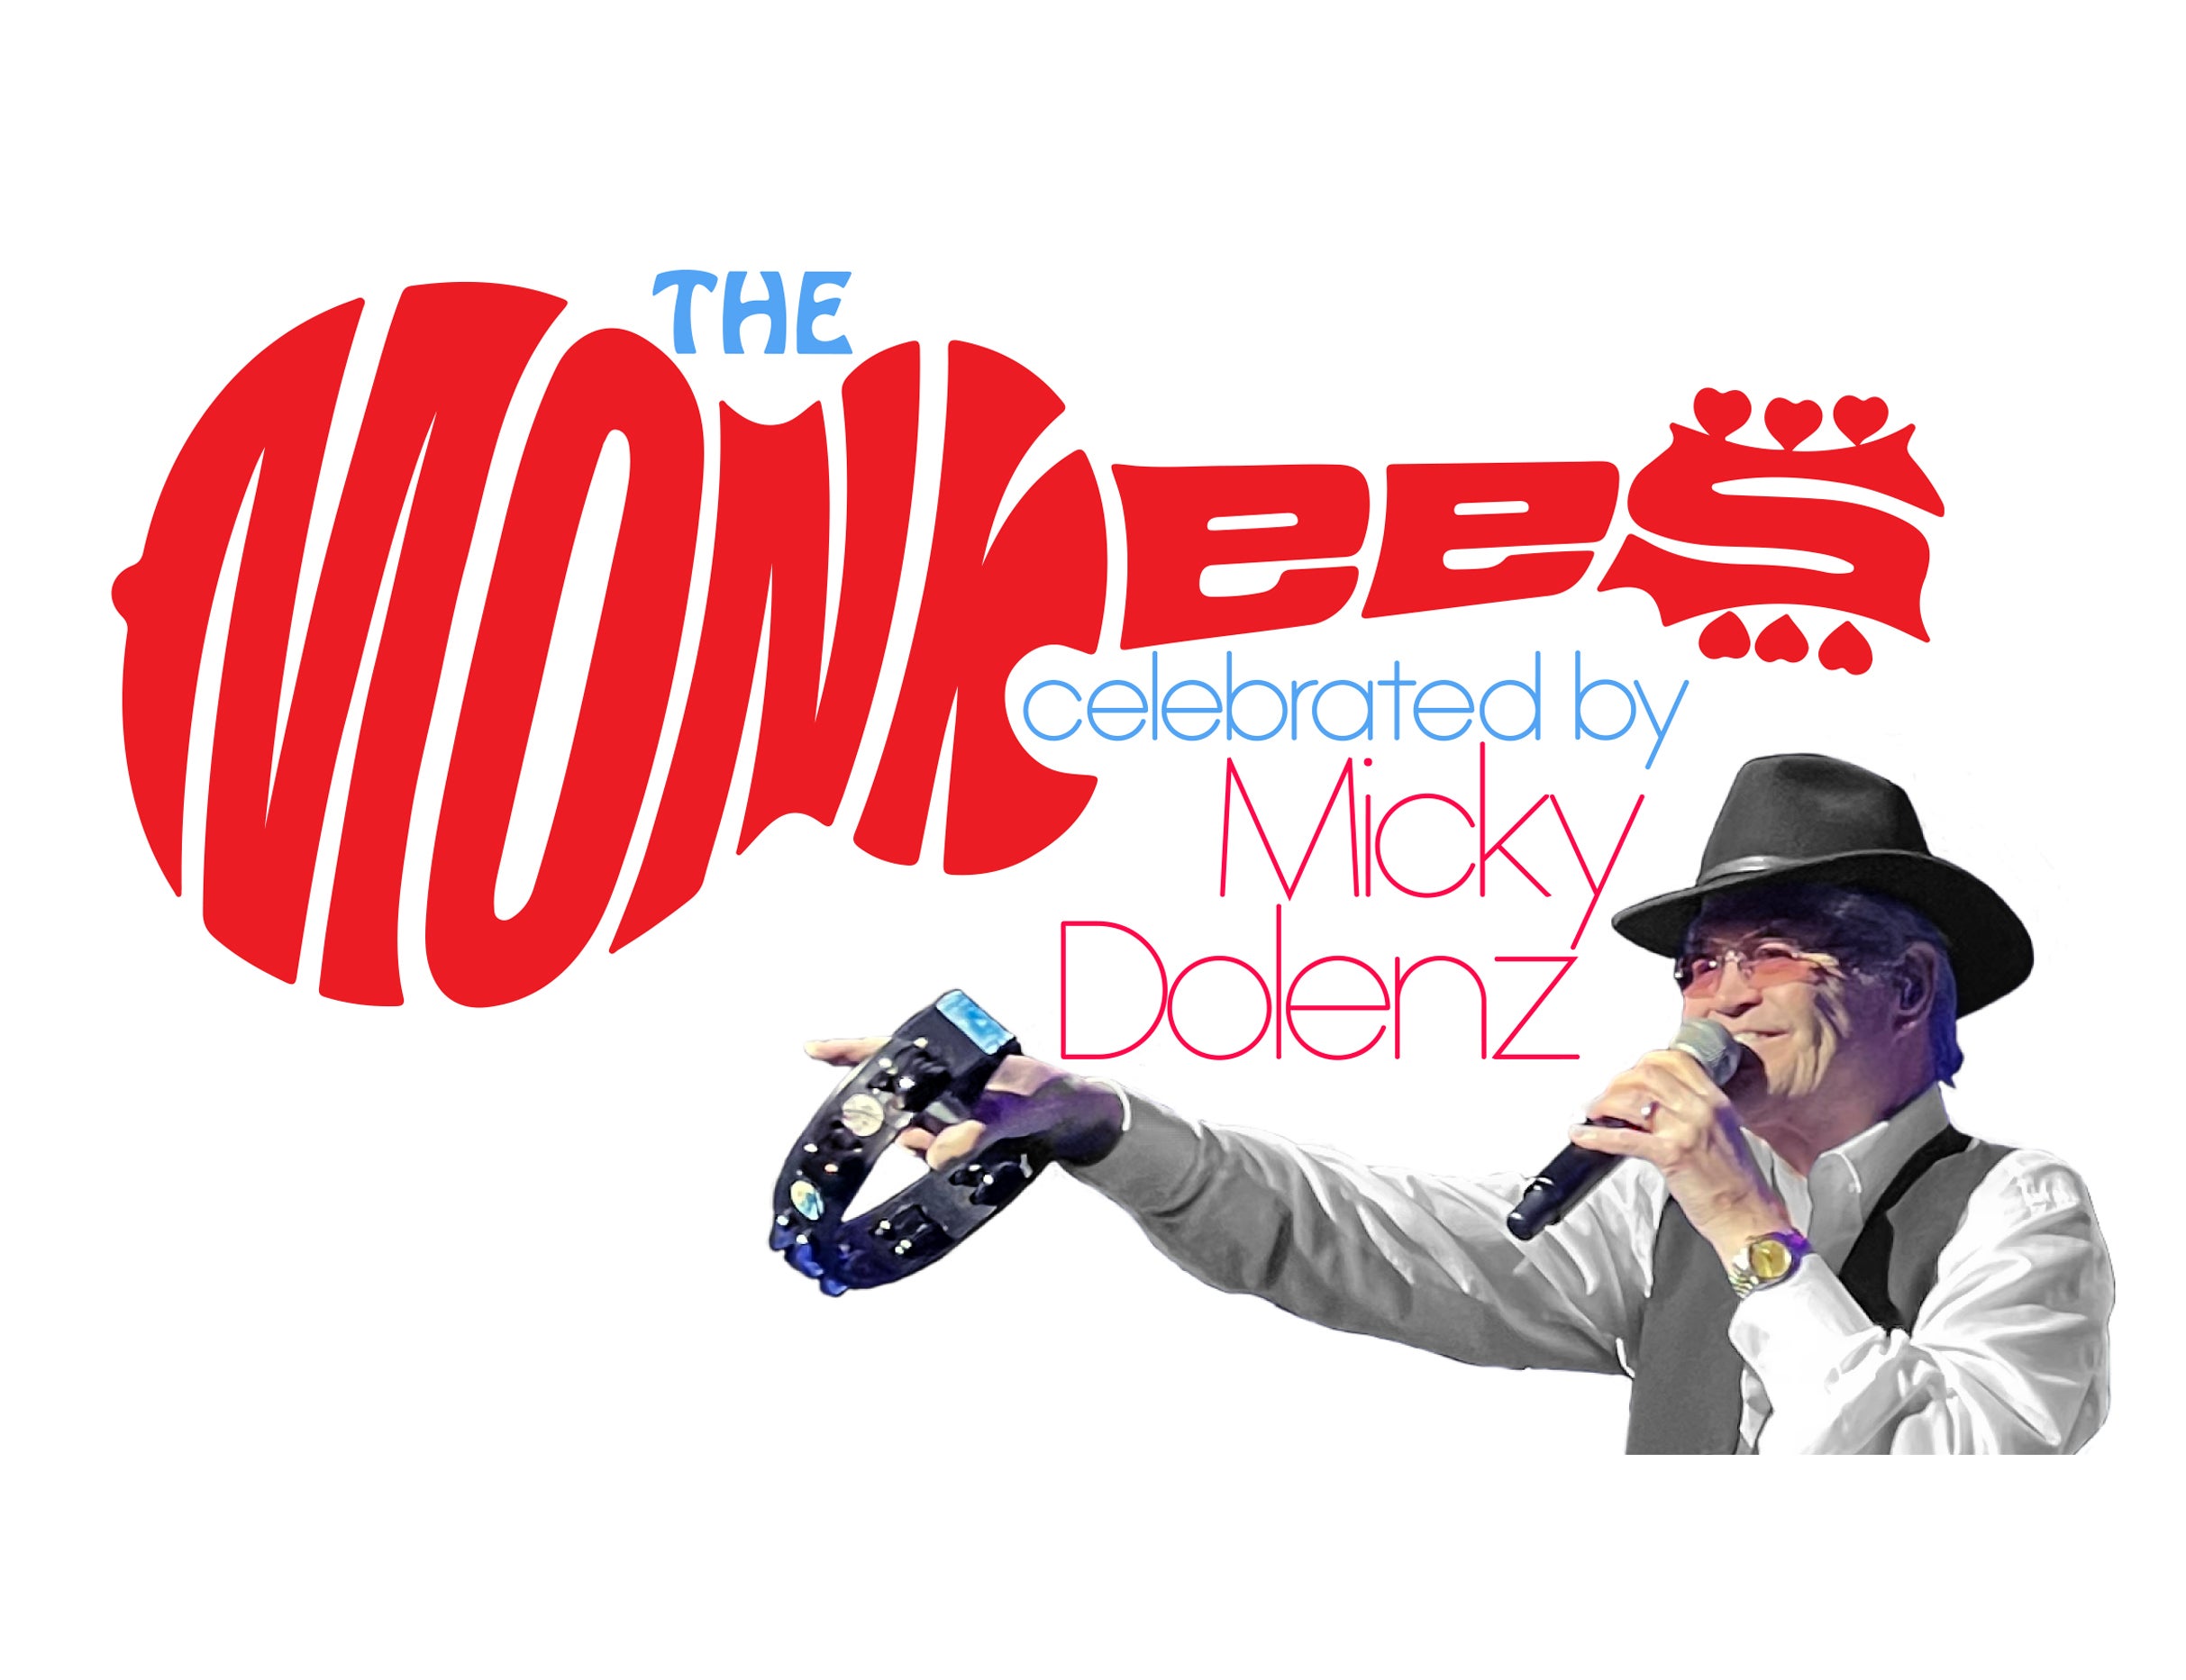 The Monkees Celebrated By Micky Dolenz in Minneapolis promo photo for Artist presale offer code